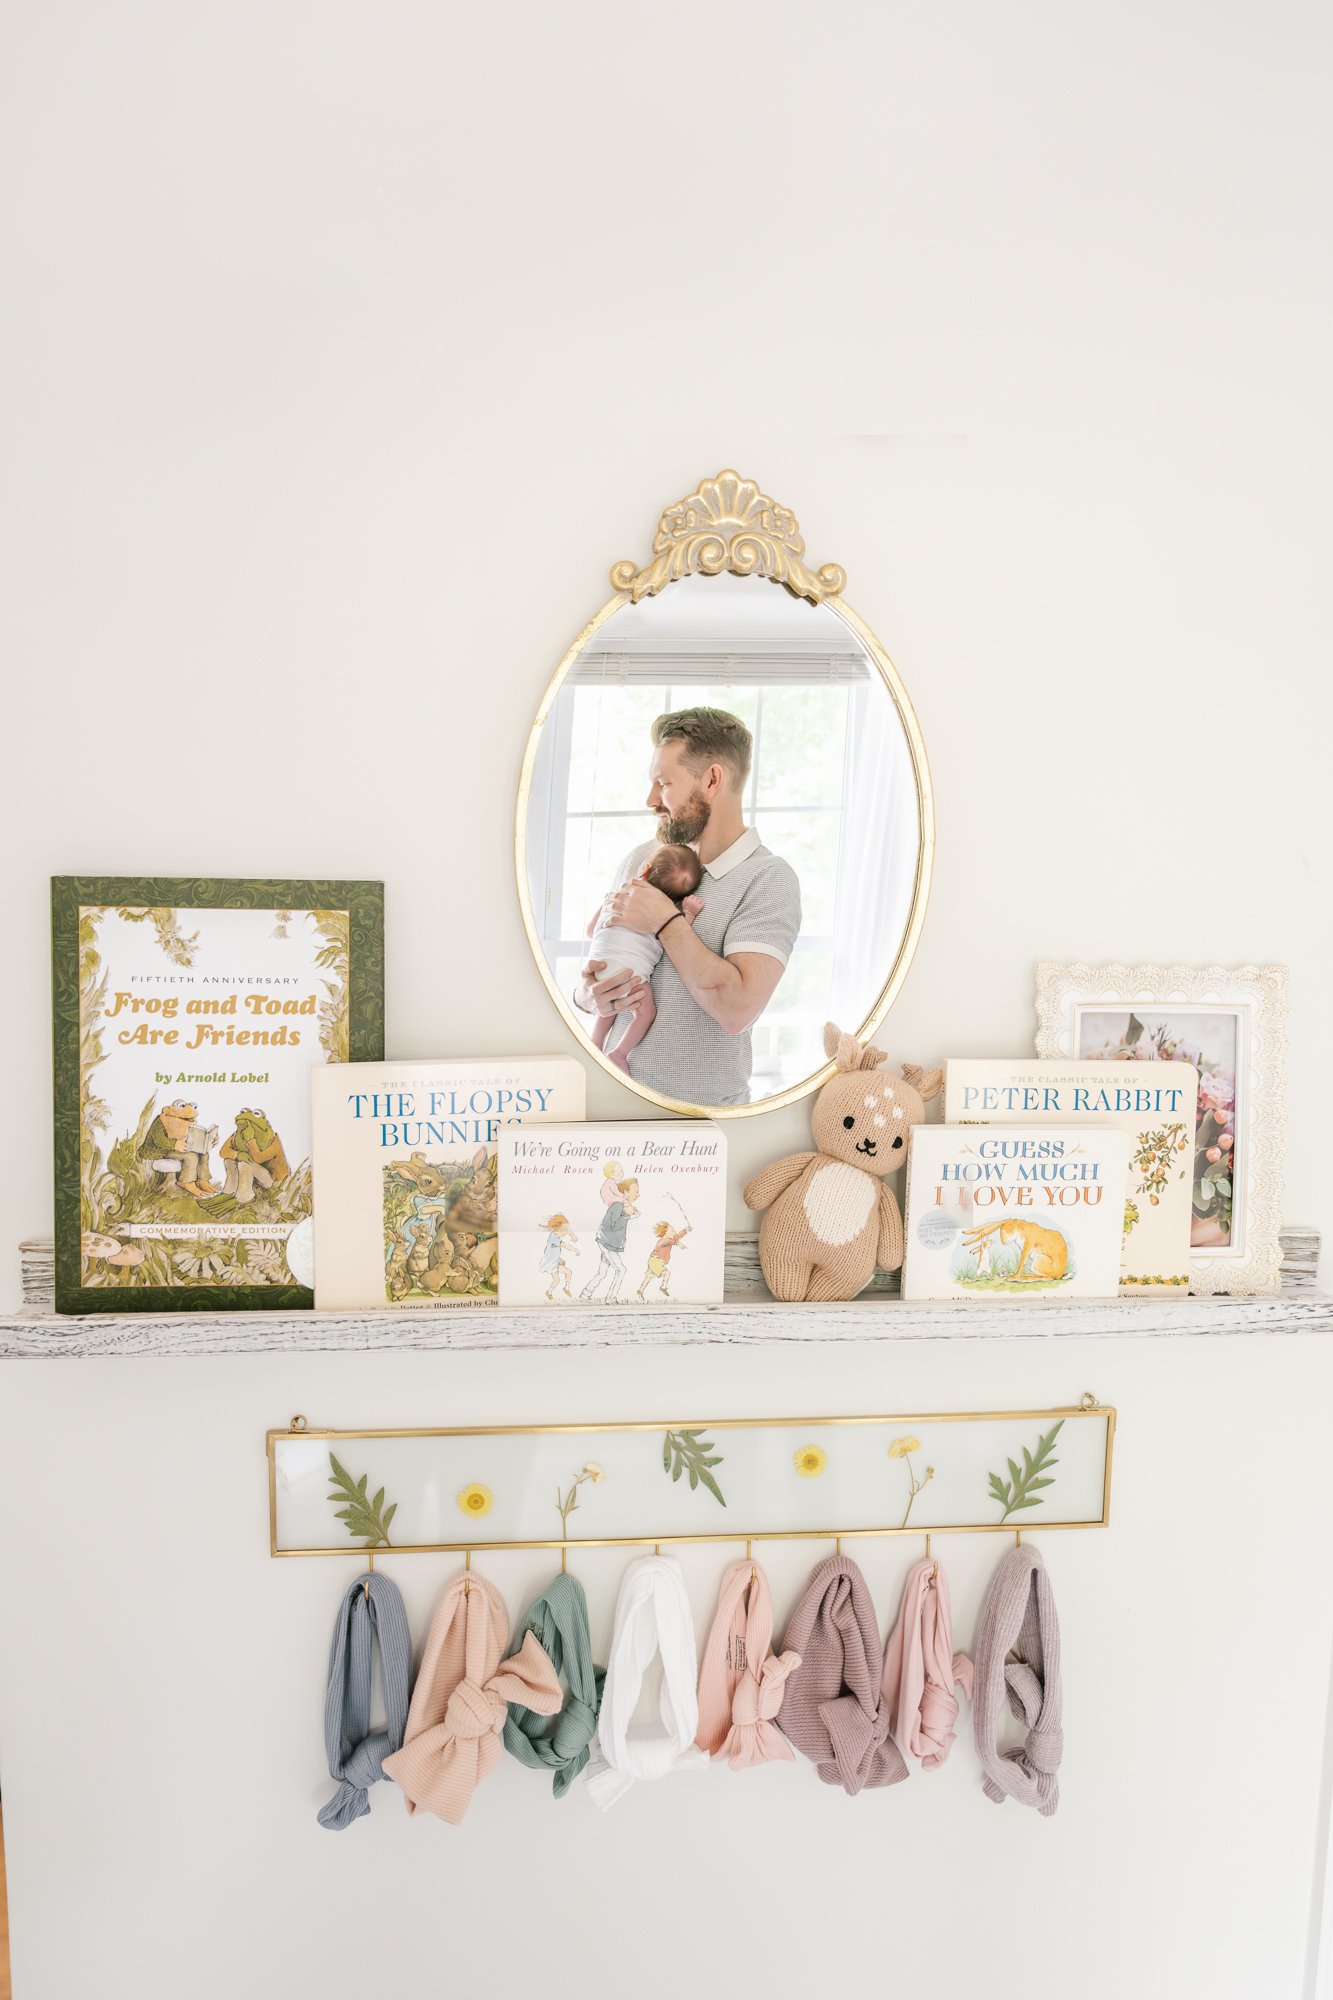  The cutest wall in the new newborn nursery. Shelf with children’s books. Floral shelf with hooks that displays all sorts of darling, classic bows. Oval gold mirror shows reflection of sweet dad holding newborn daughter. Captured by Nicole Hawkins ph